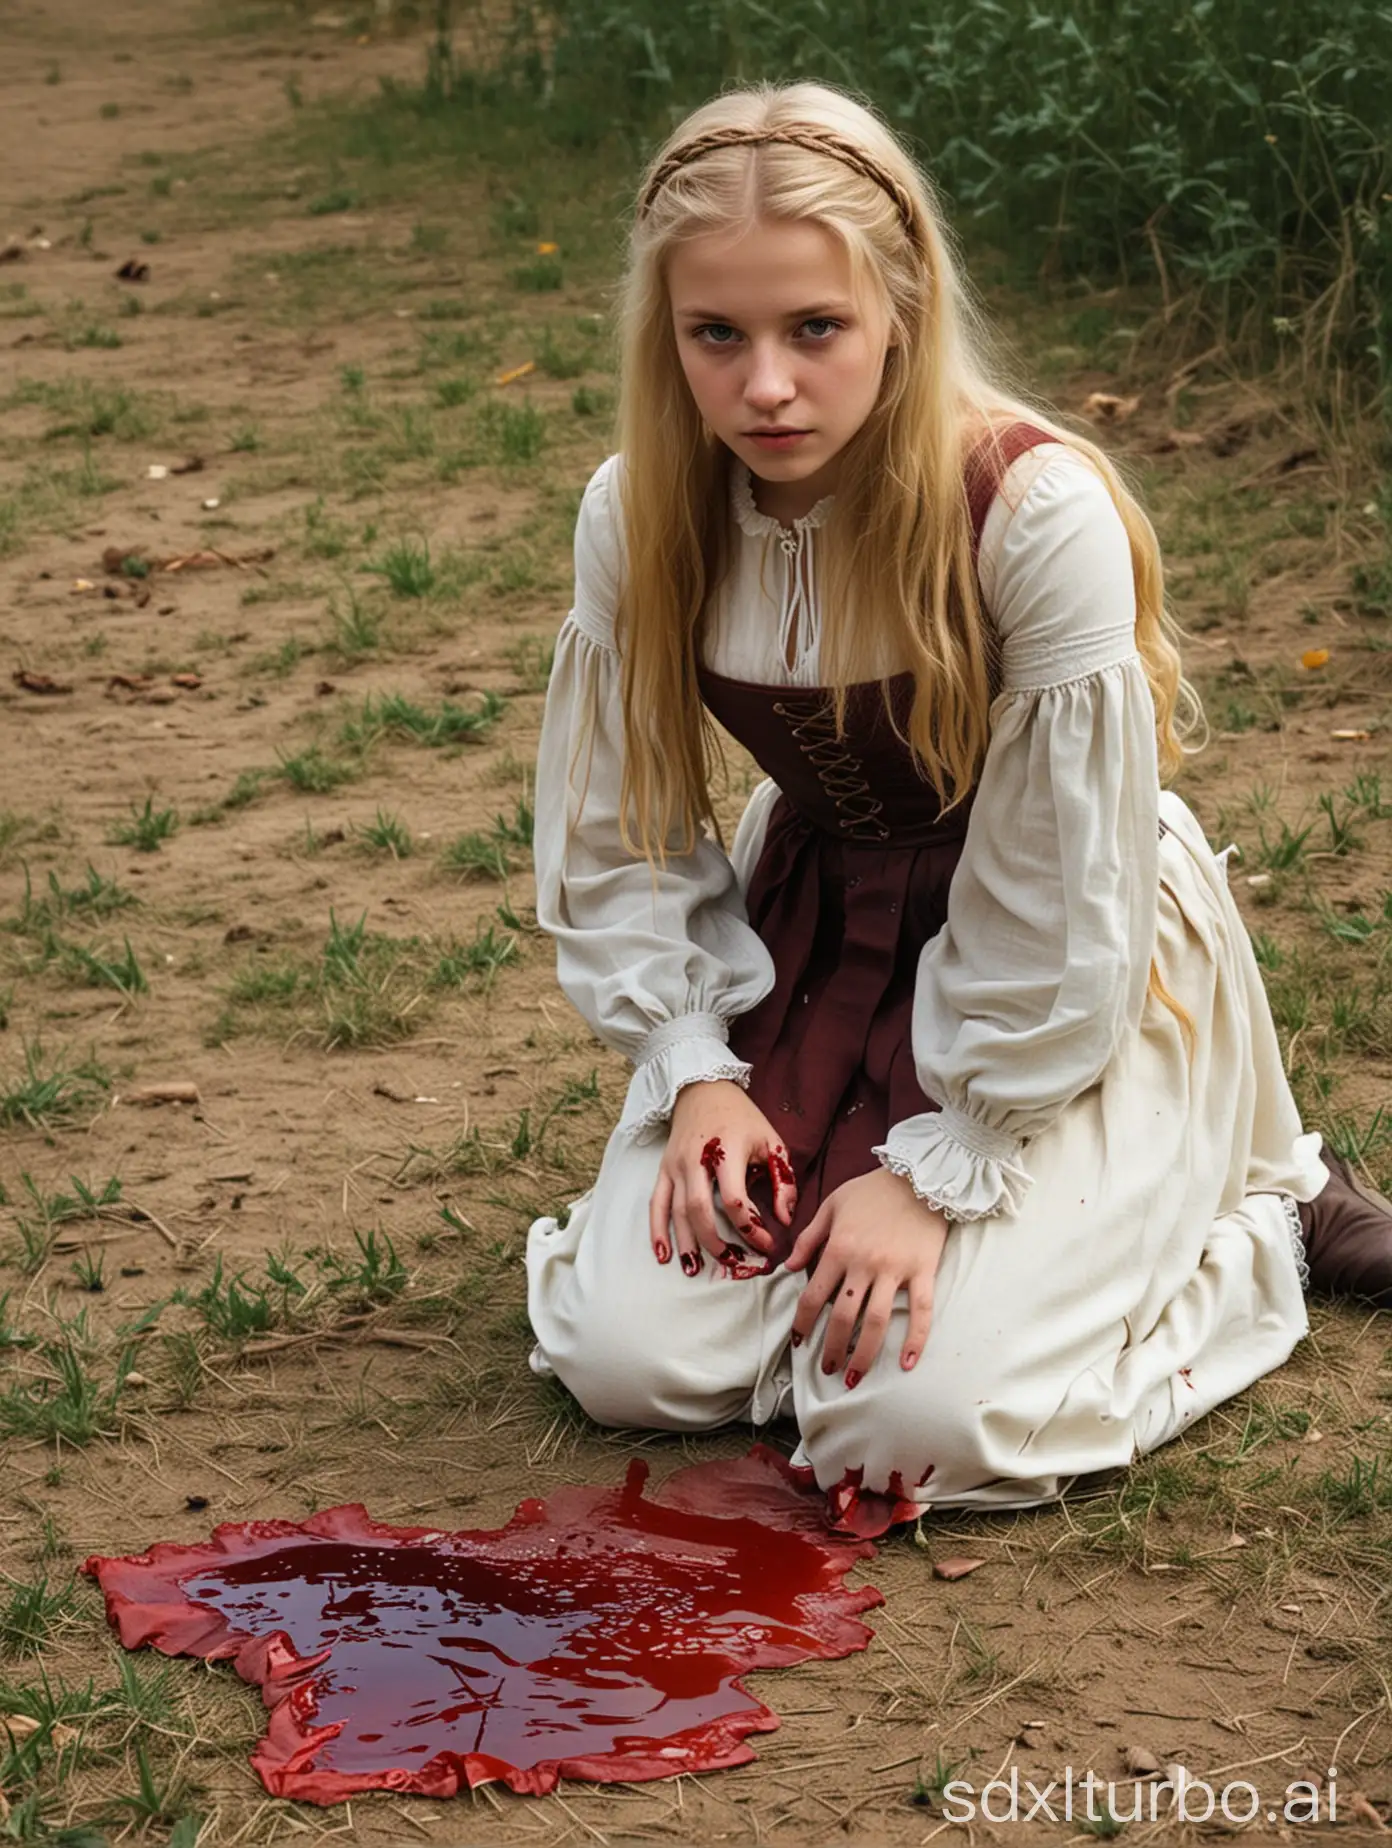 blonde girl 15th century clothes kneeling blood stained